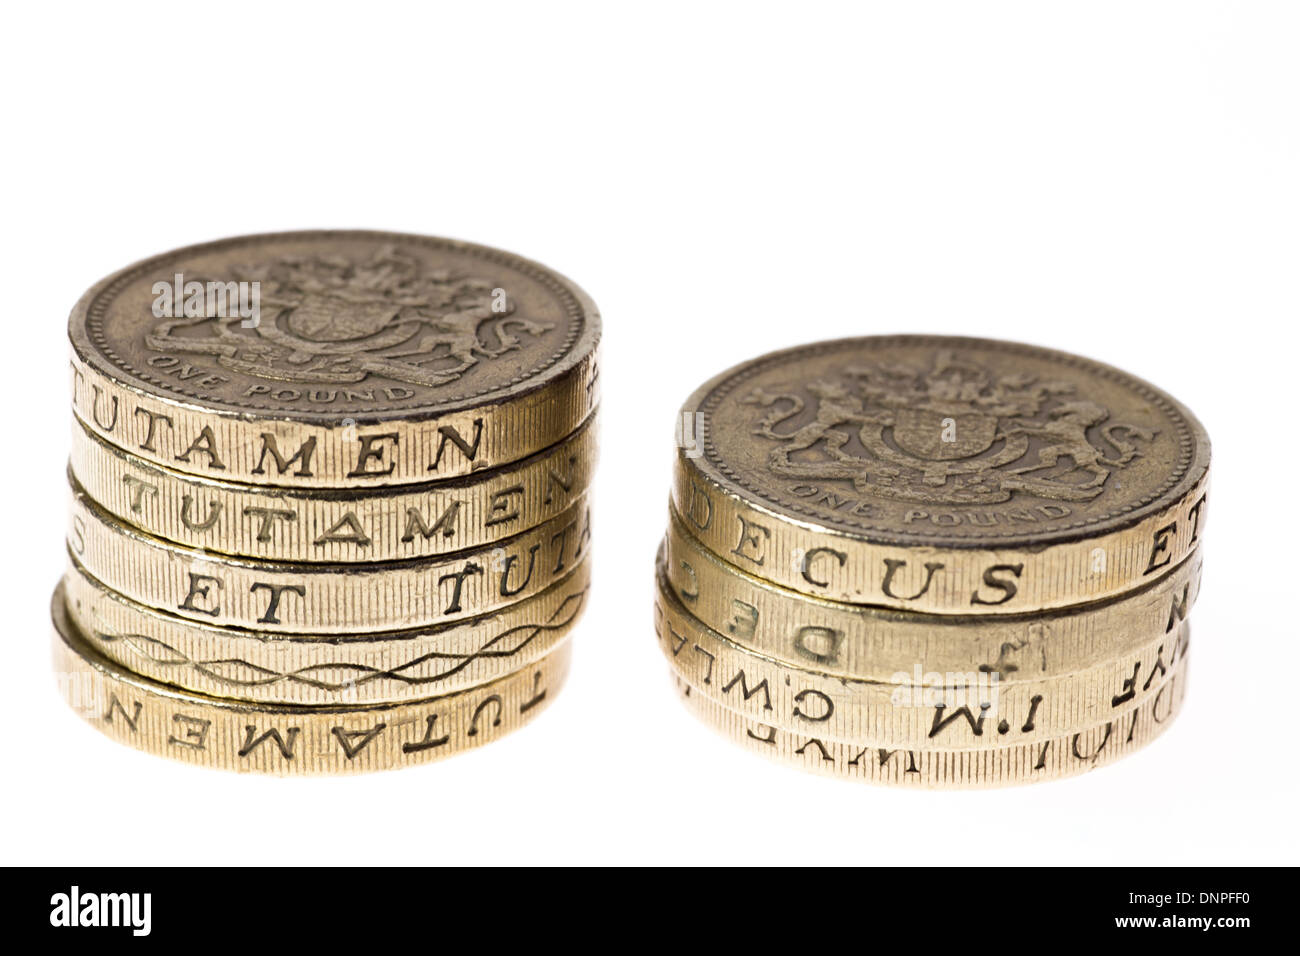 Two unequal piles of British one pound coins Stock Photo